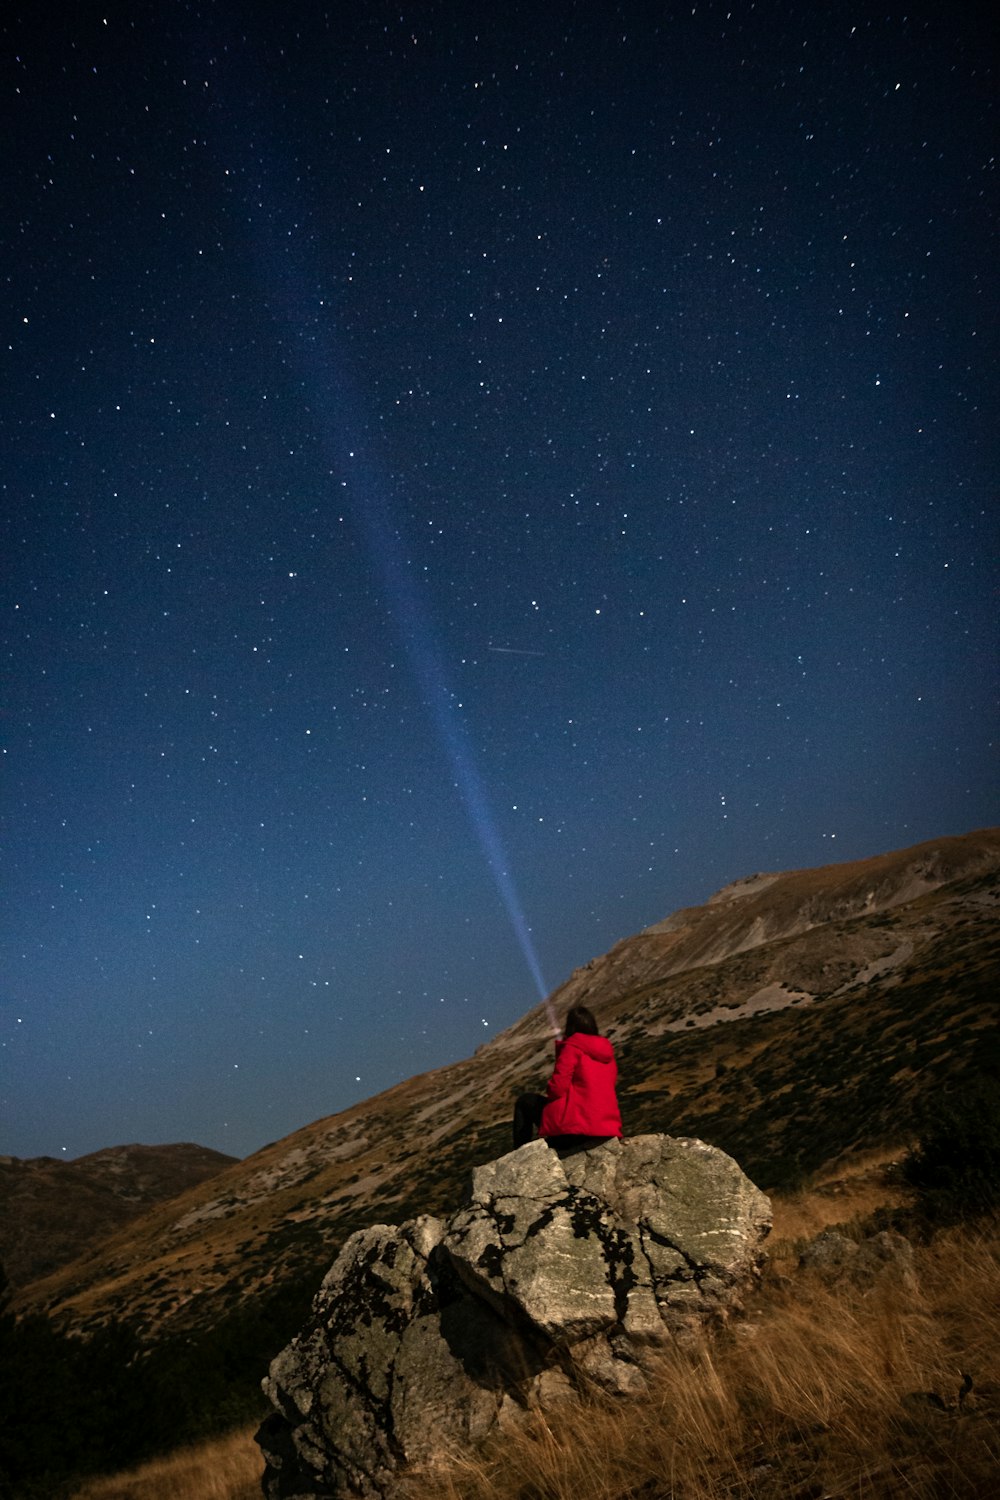 a person sitting on top of a rock under a night sky